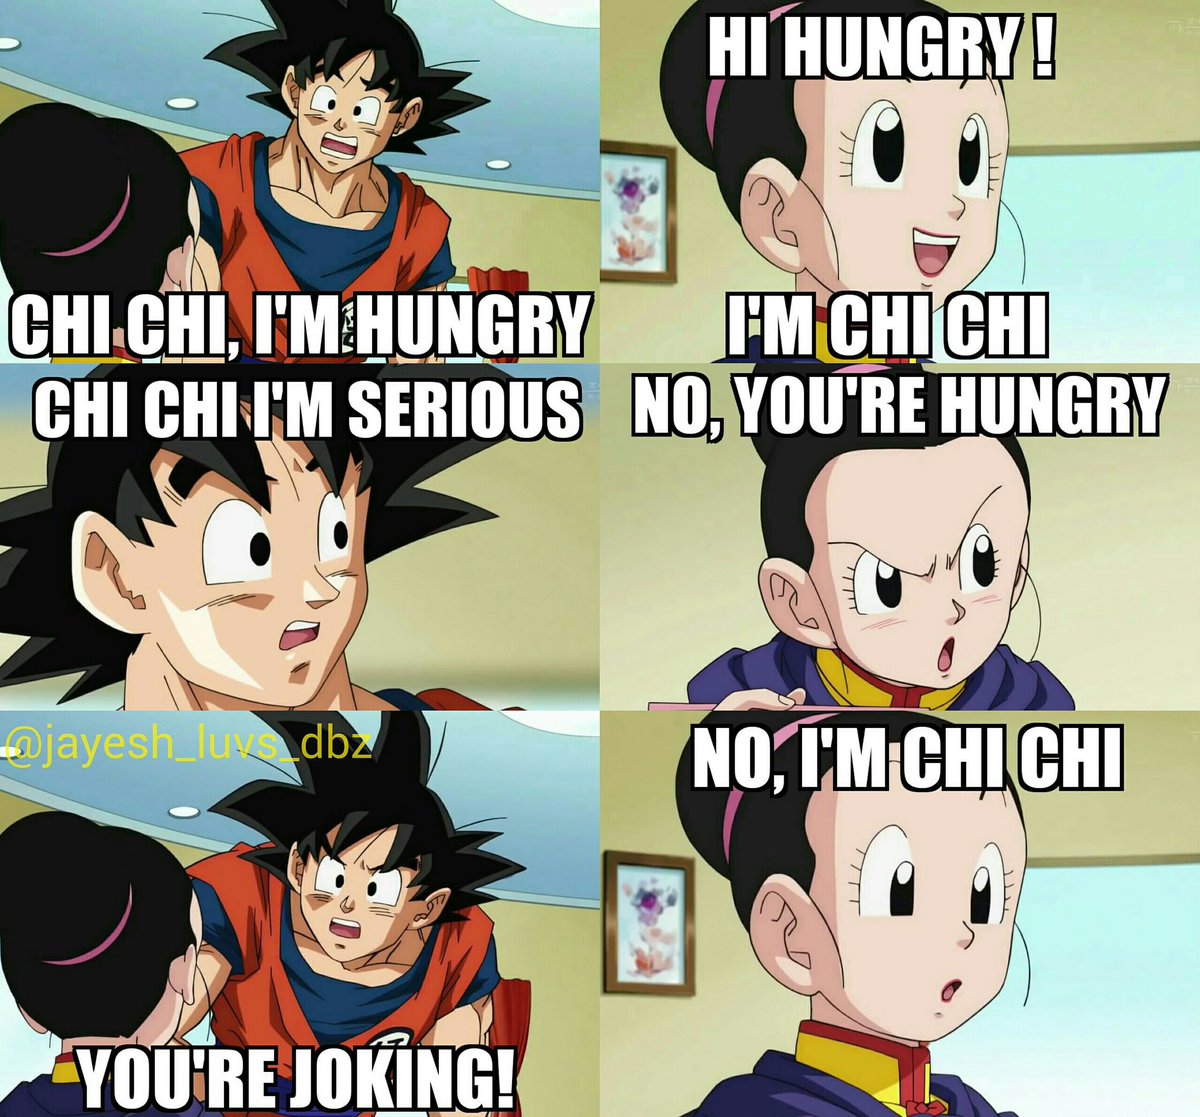 The Dbz Meme Page On Twitter Chi Chi Knows How To Handle That Hungry